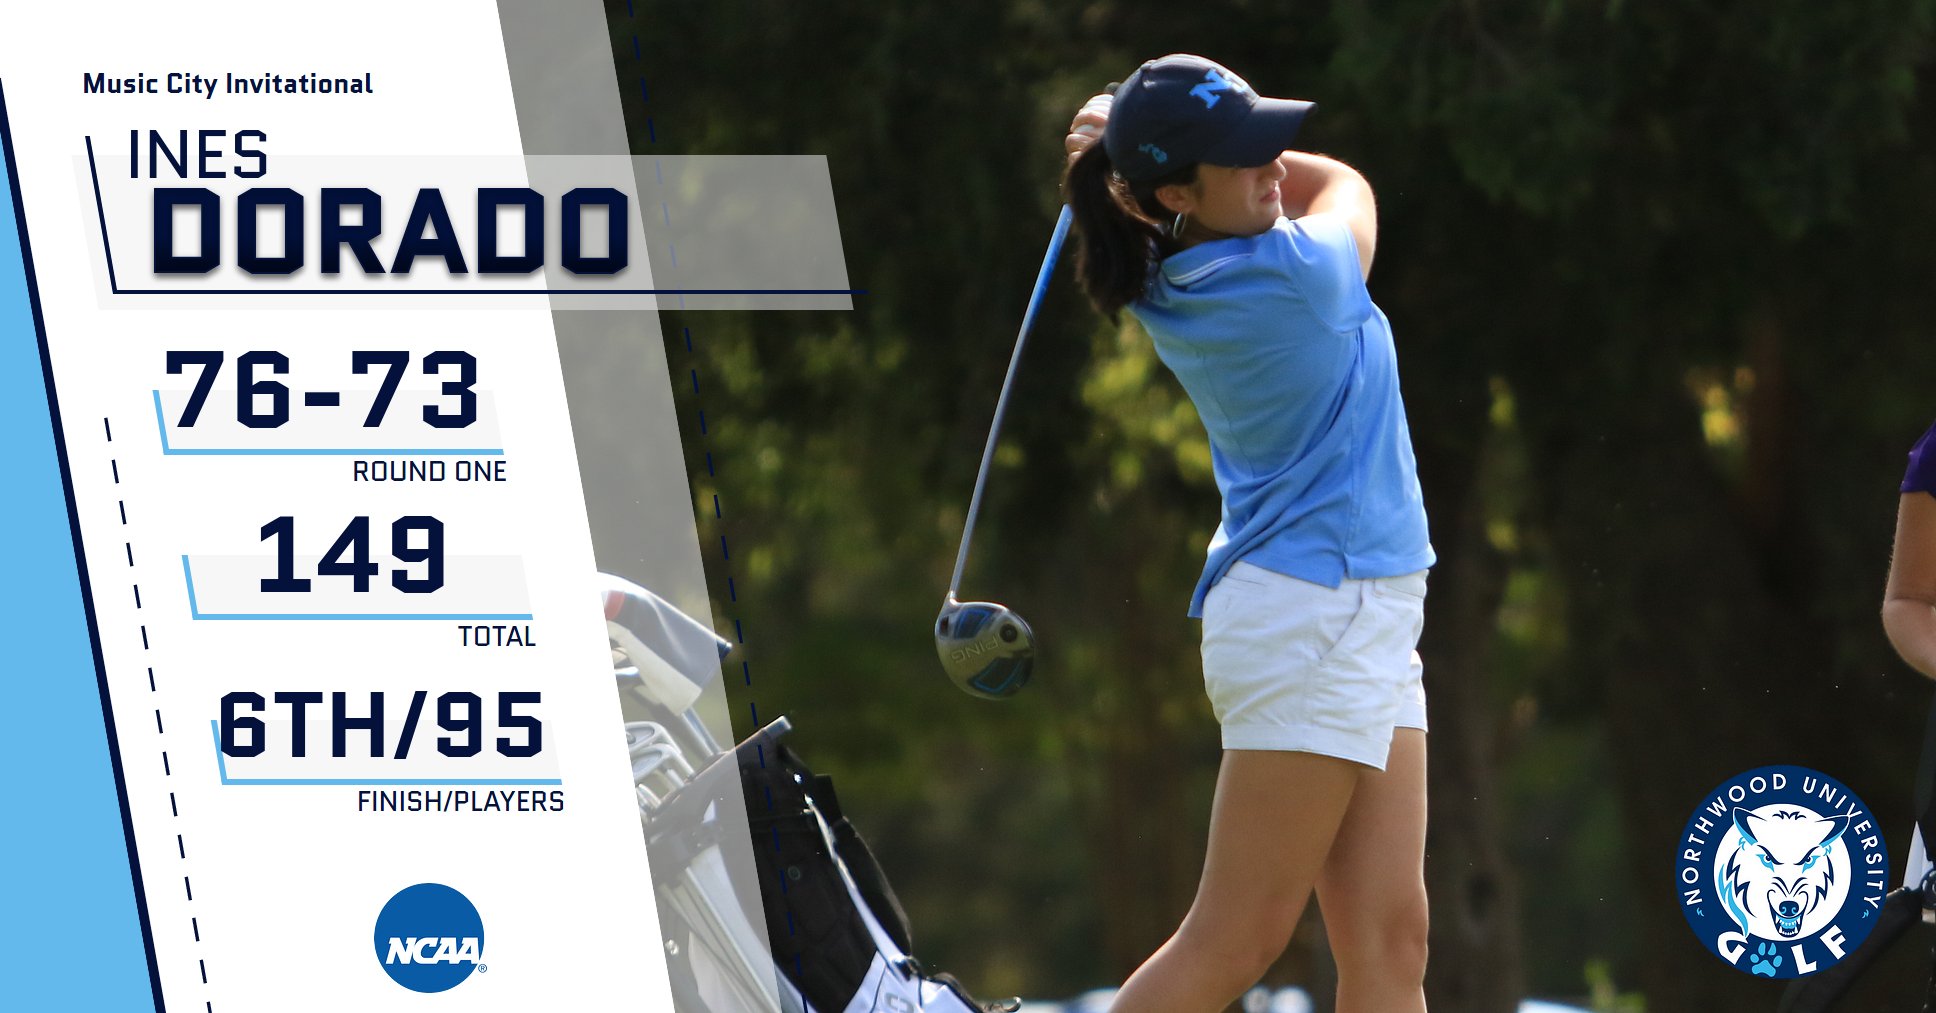 Women's Golf Ties For Second At Music City Invitational